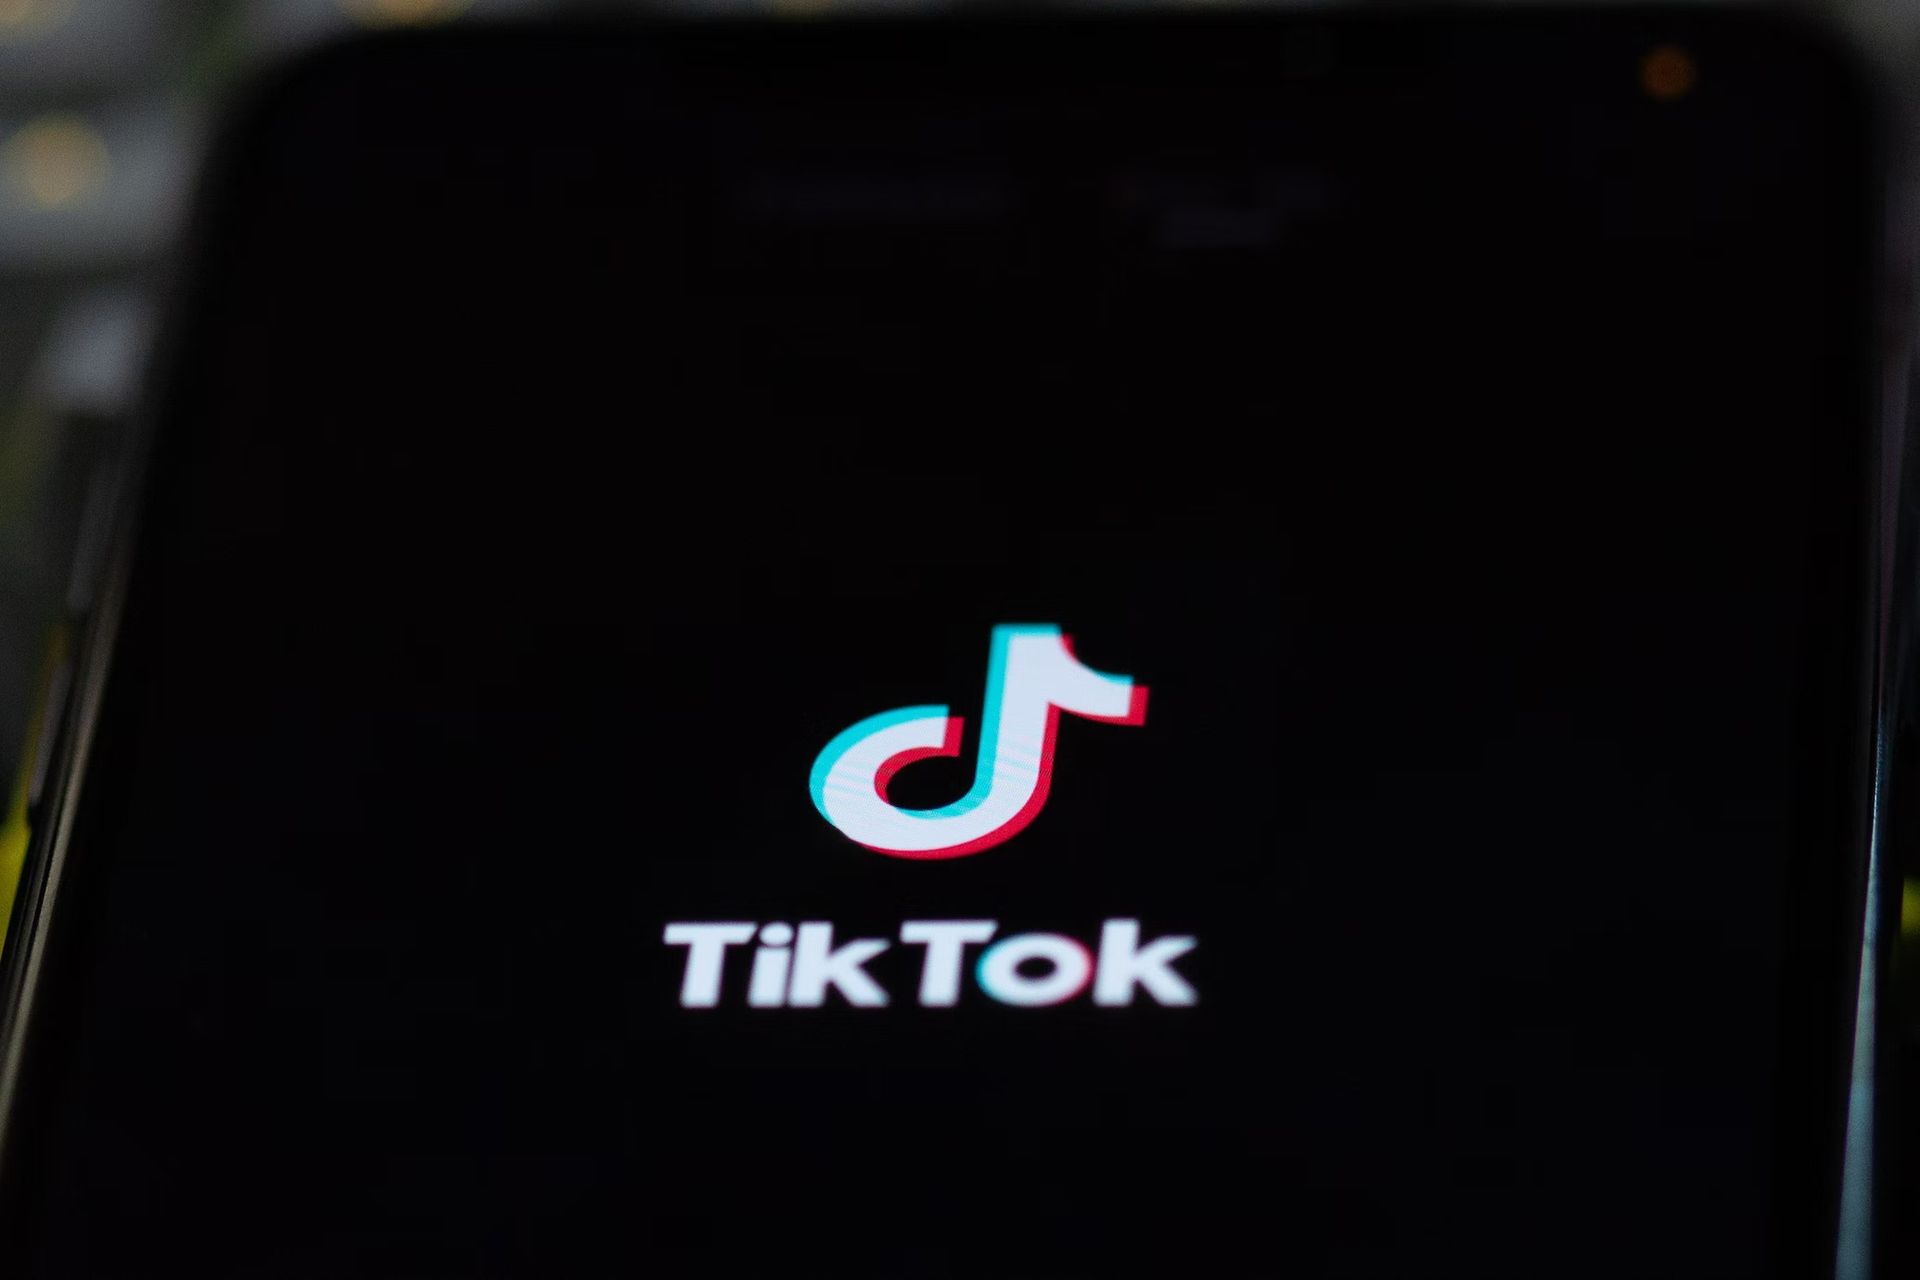 How to turn on and turn off activity status on TikTok?